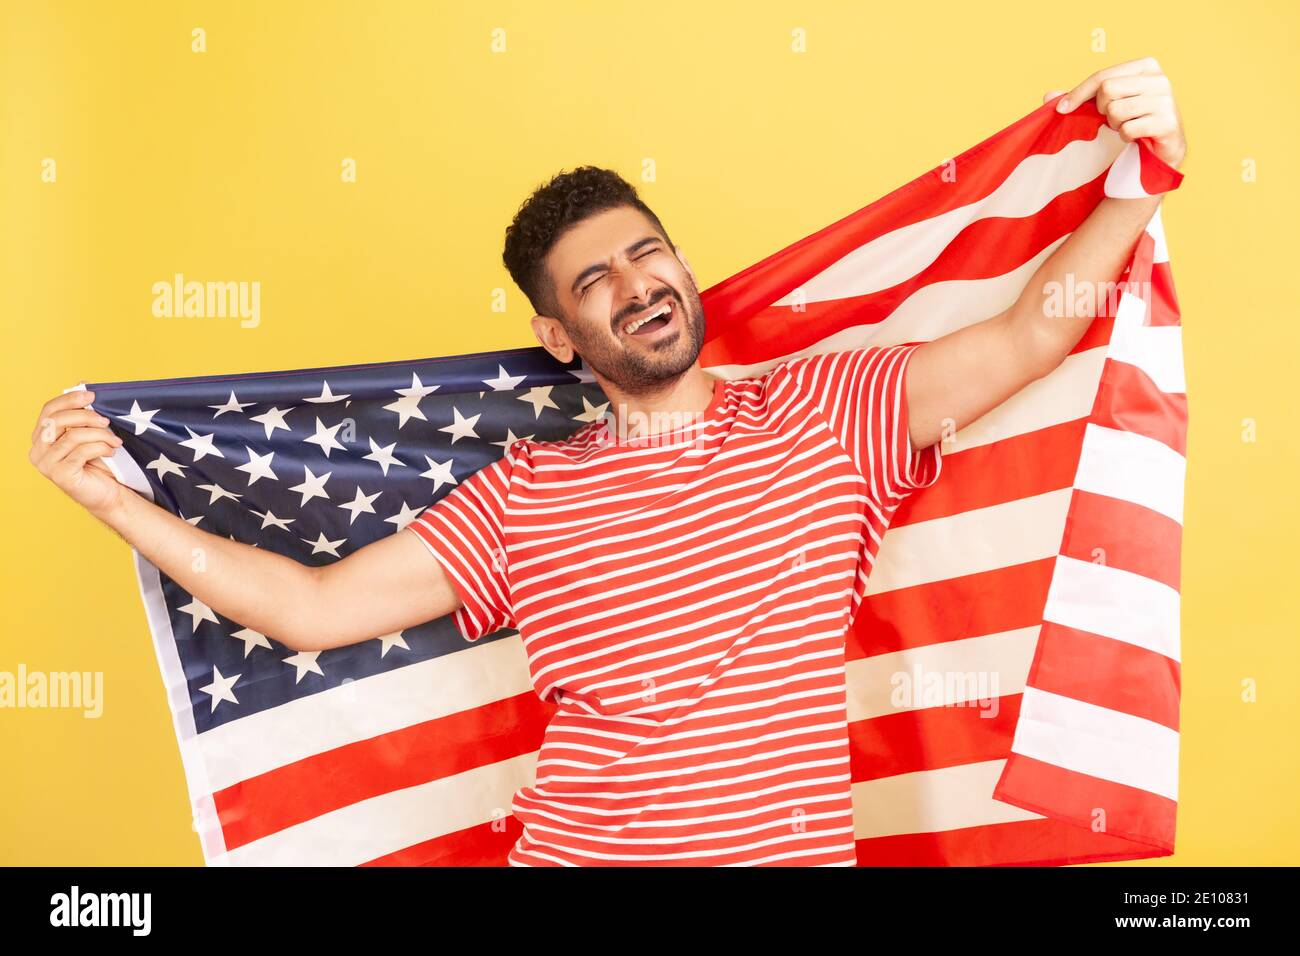 Excited patriotic man with beard in striped t-shirt standing holding in hands flag of united states of america and screaming, singing anthem. Indoor s Stock Photo